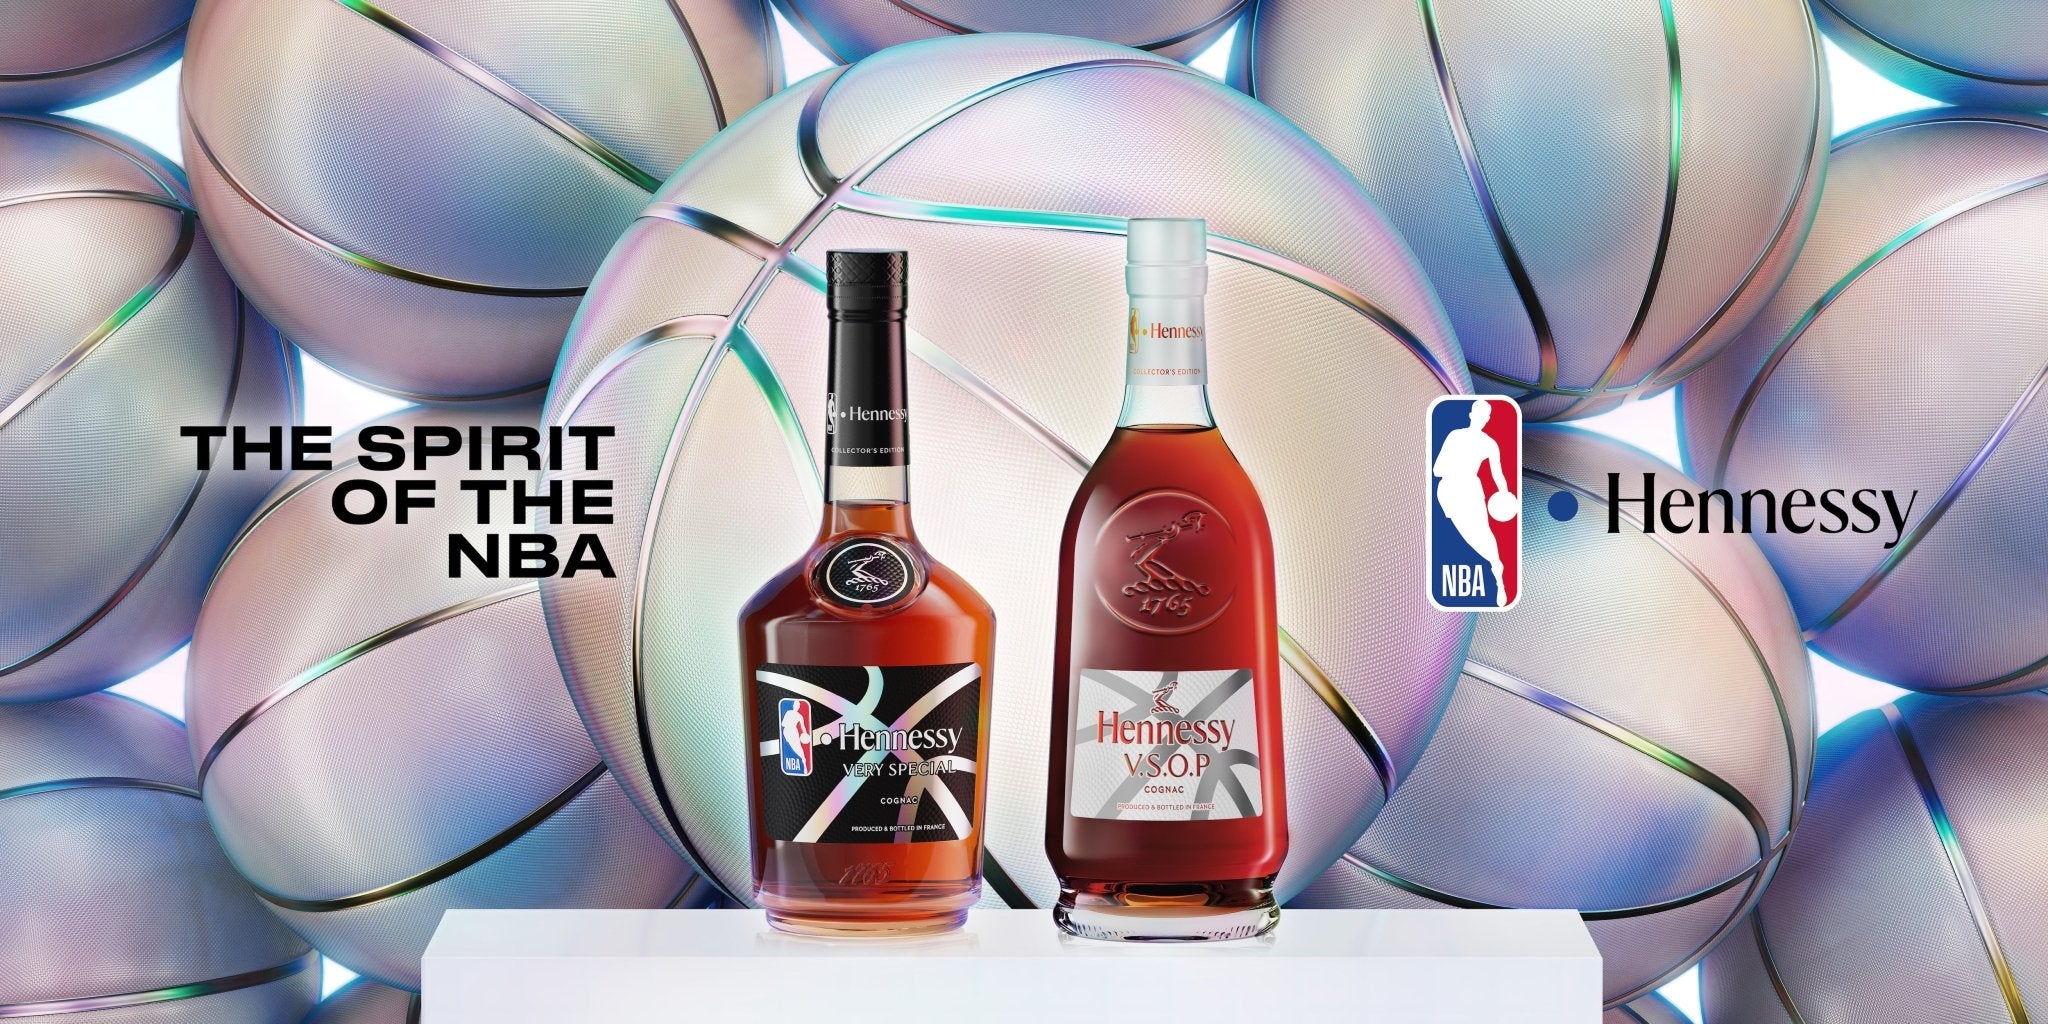 Hennessy-NBA-is-back-for-Season-3-Here-s-what-you-need-to-know The Bottle Club